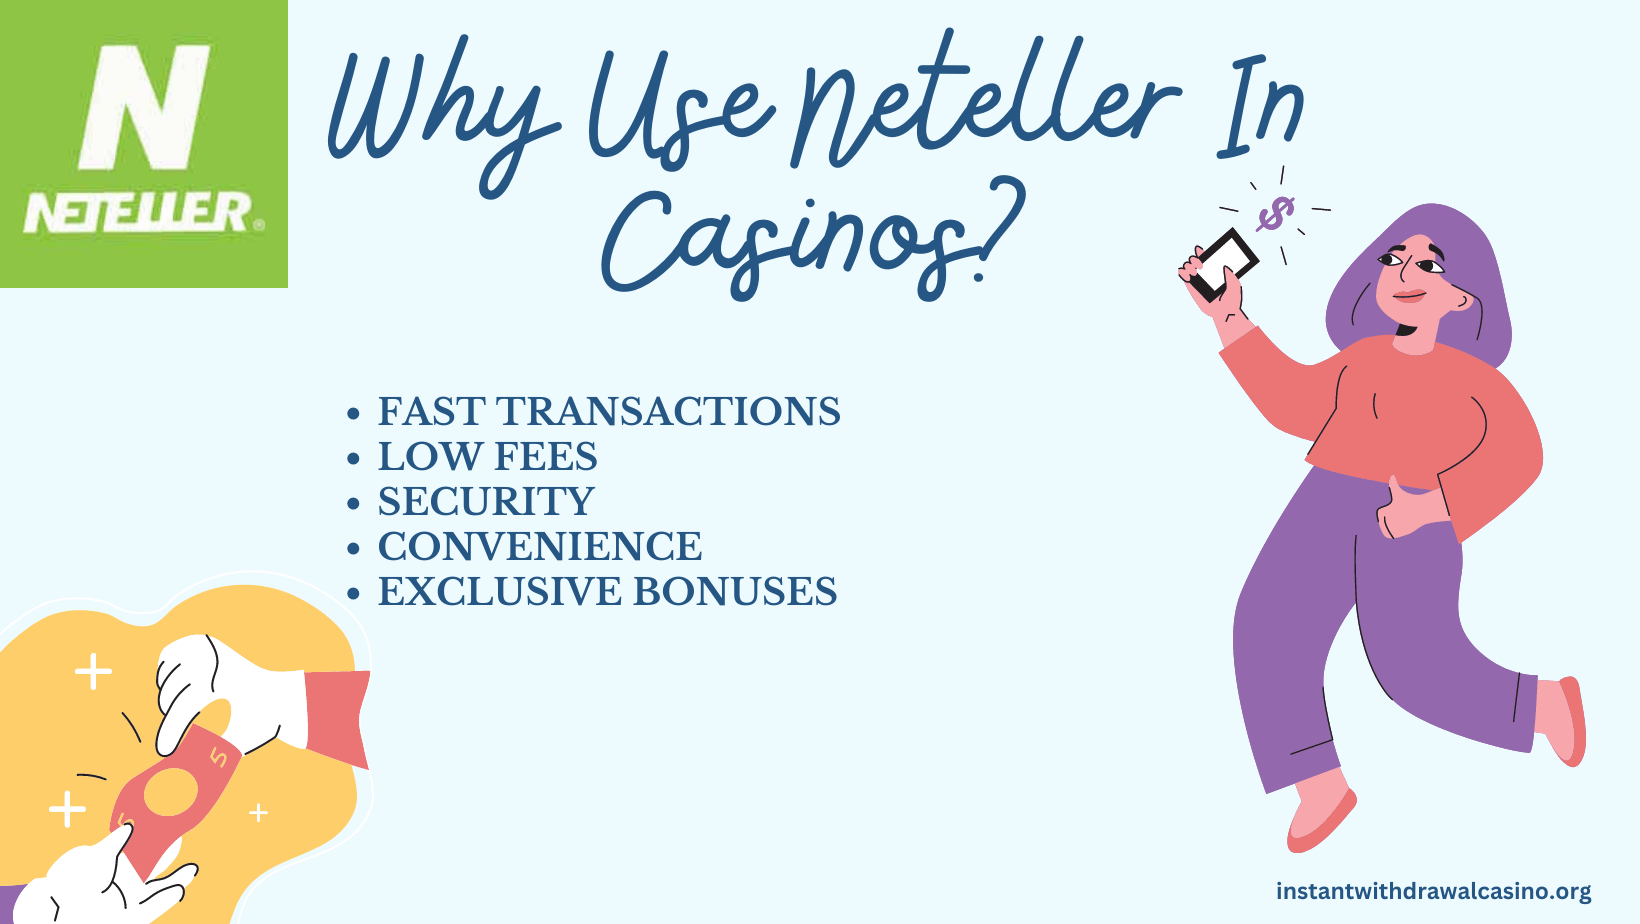 Advantages of instant neteller withdrawal casino